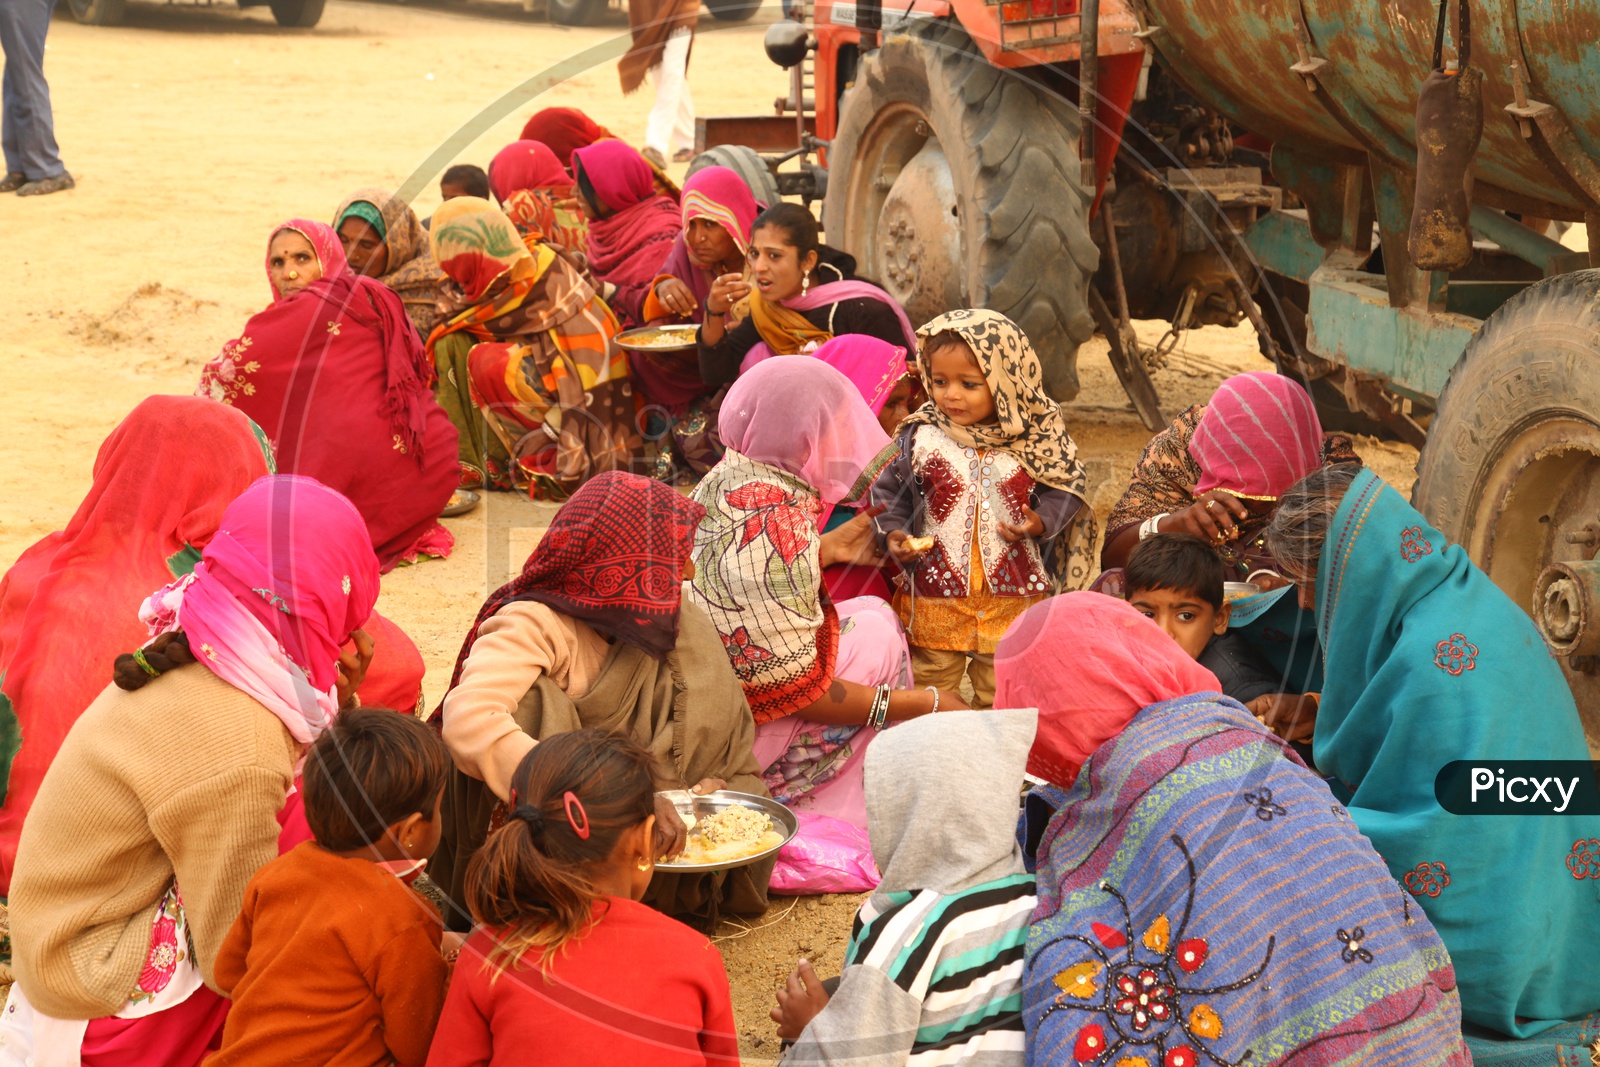 Rajasthan Local Women Having Food sitting as a Group